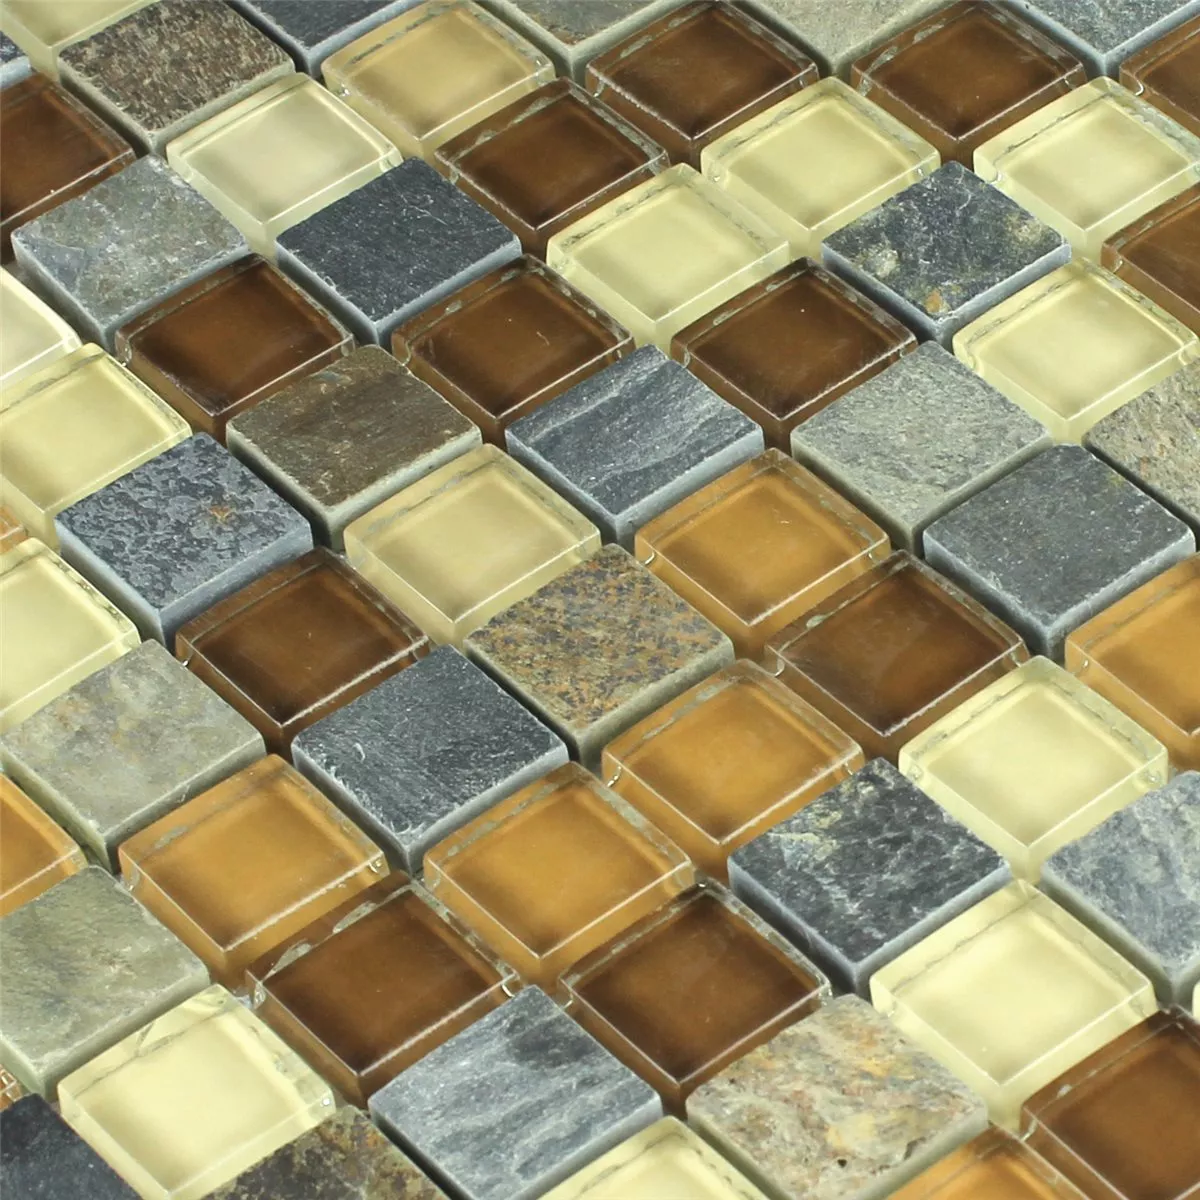 Sample Mosaic Tiles Glass Natural Stone Beige